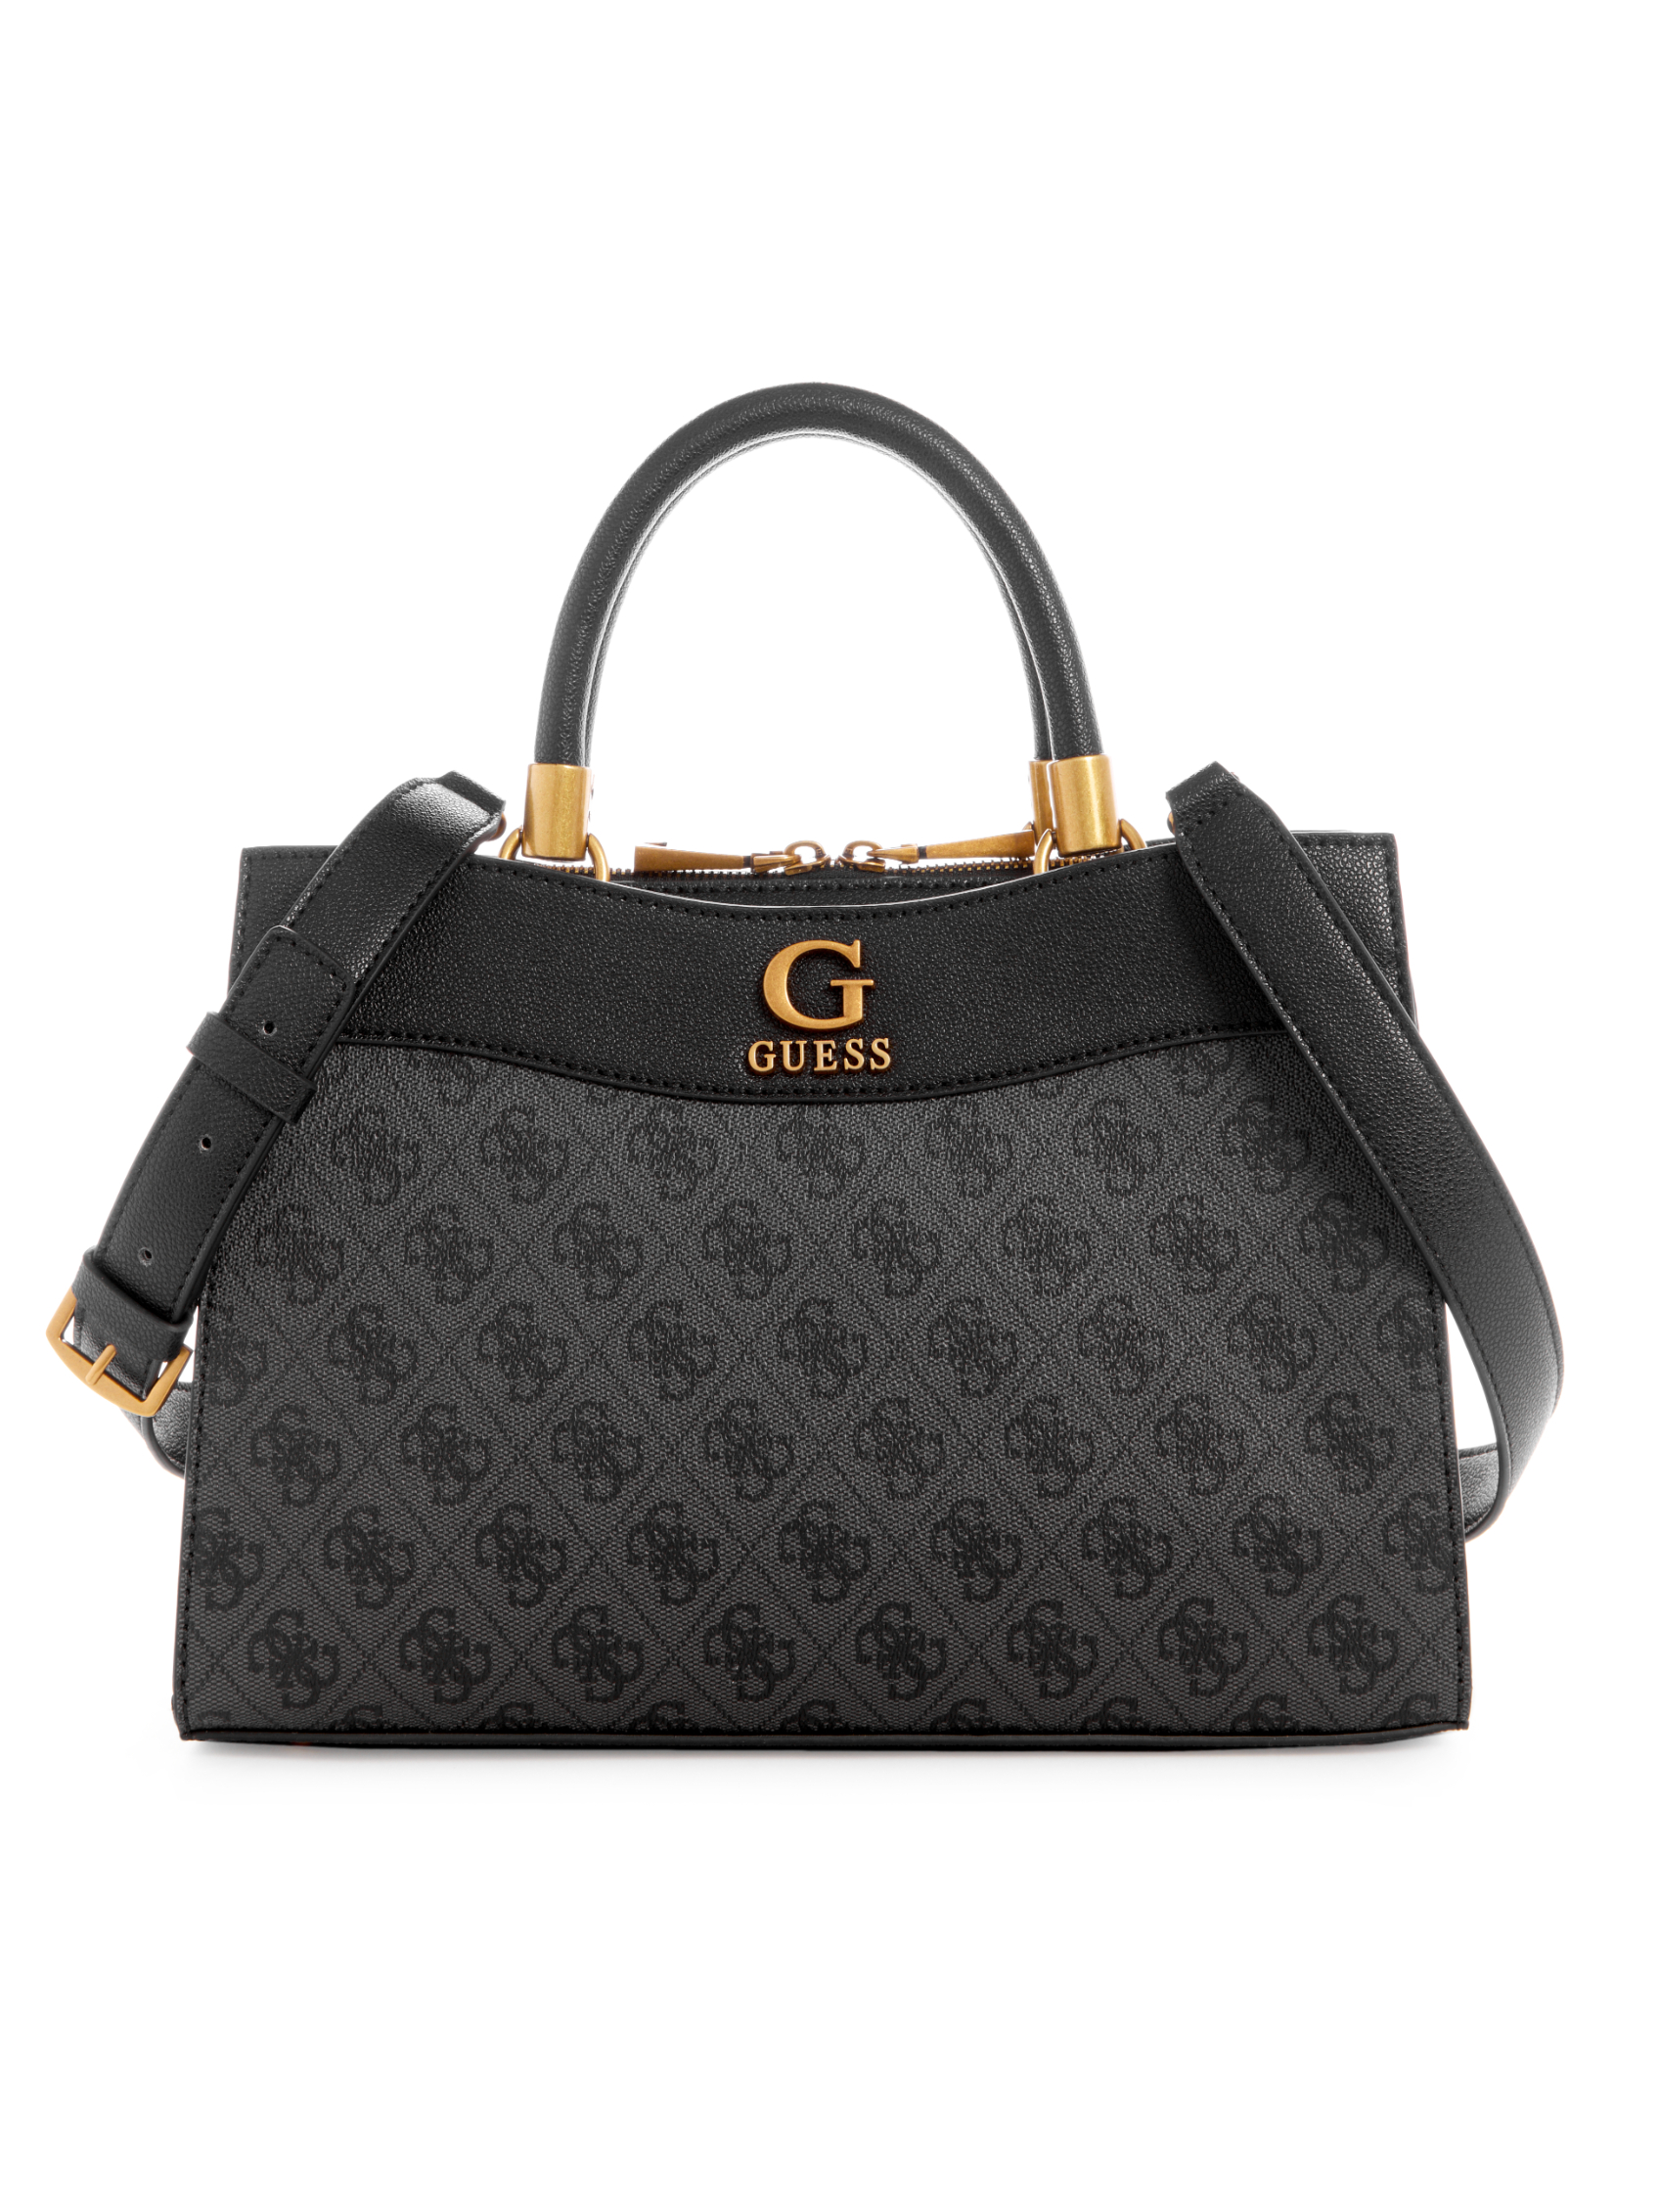 NELL LOGO SMALL GIRLFRIEND SATCHEL | Guess Philippines